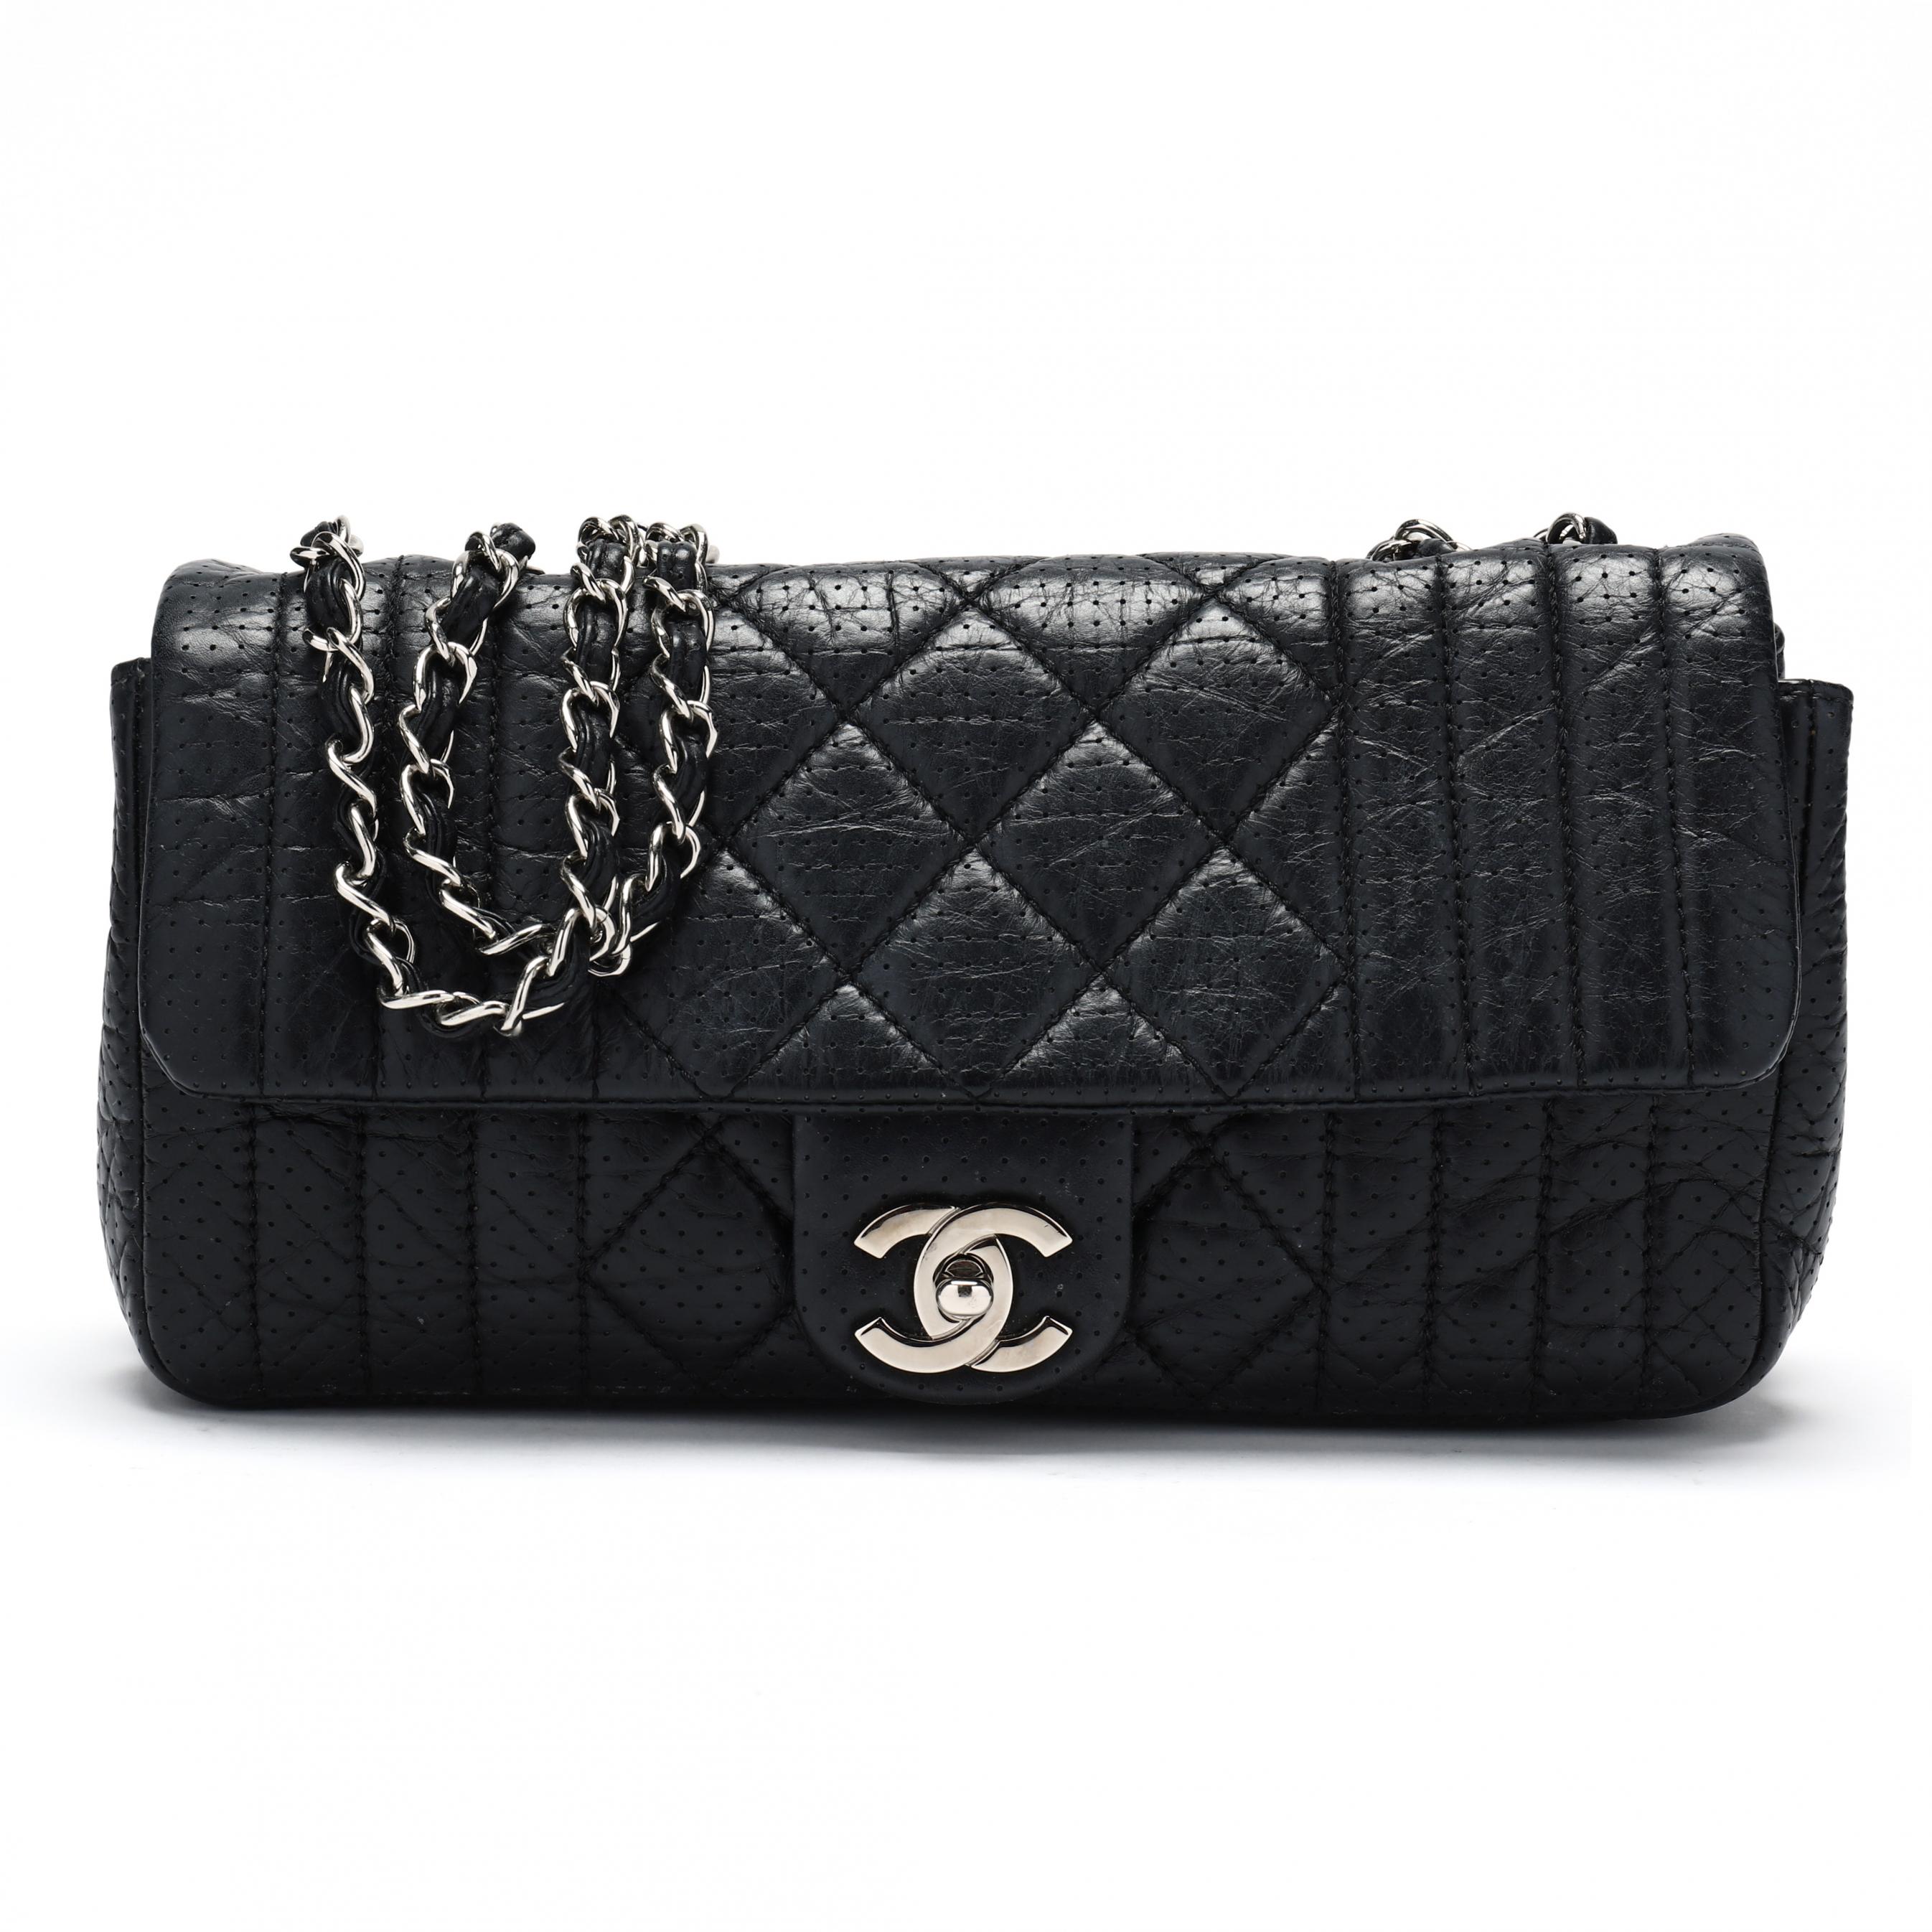 Aged Calfskin Perforated Flap Bag, Chanel (Lot 1026 - Holiday Boutique:  Luxury Accessories, Jewelry, & SilverDec 8, 2022, 10:00am)